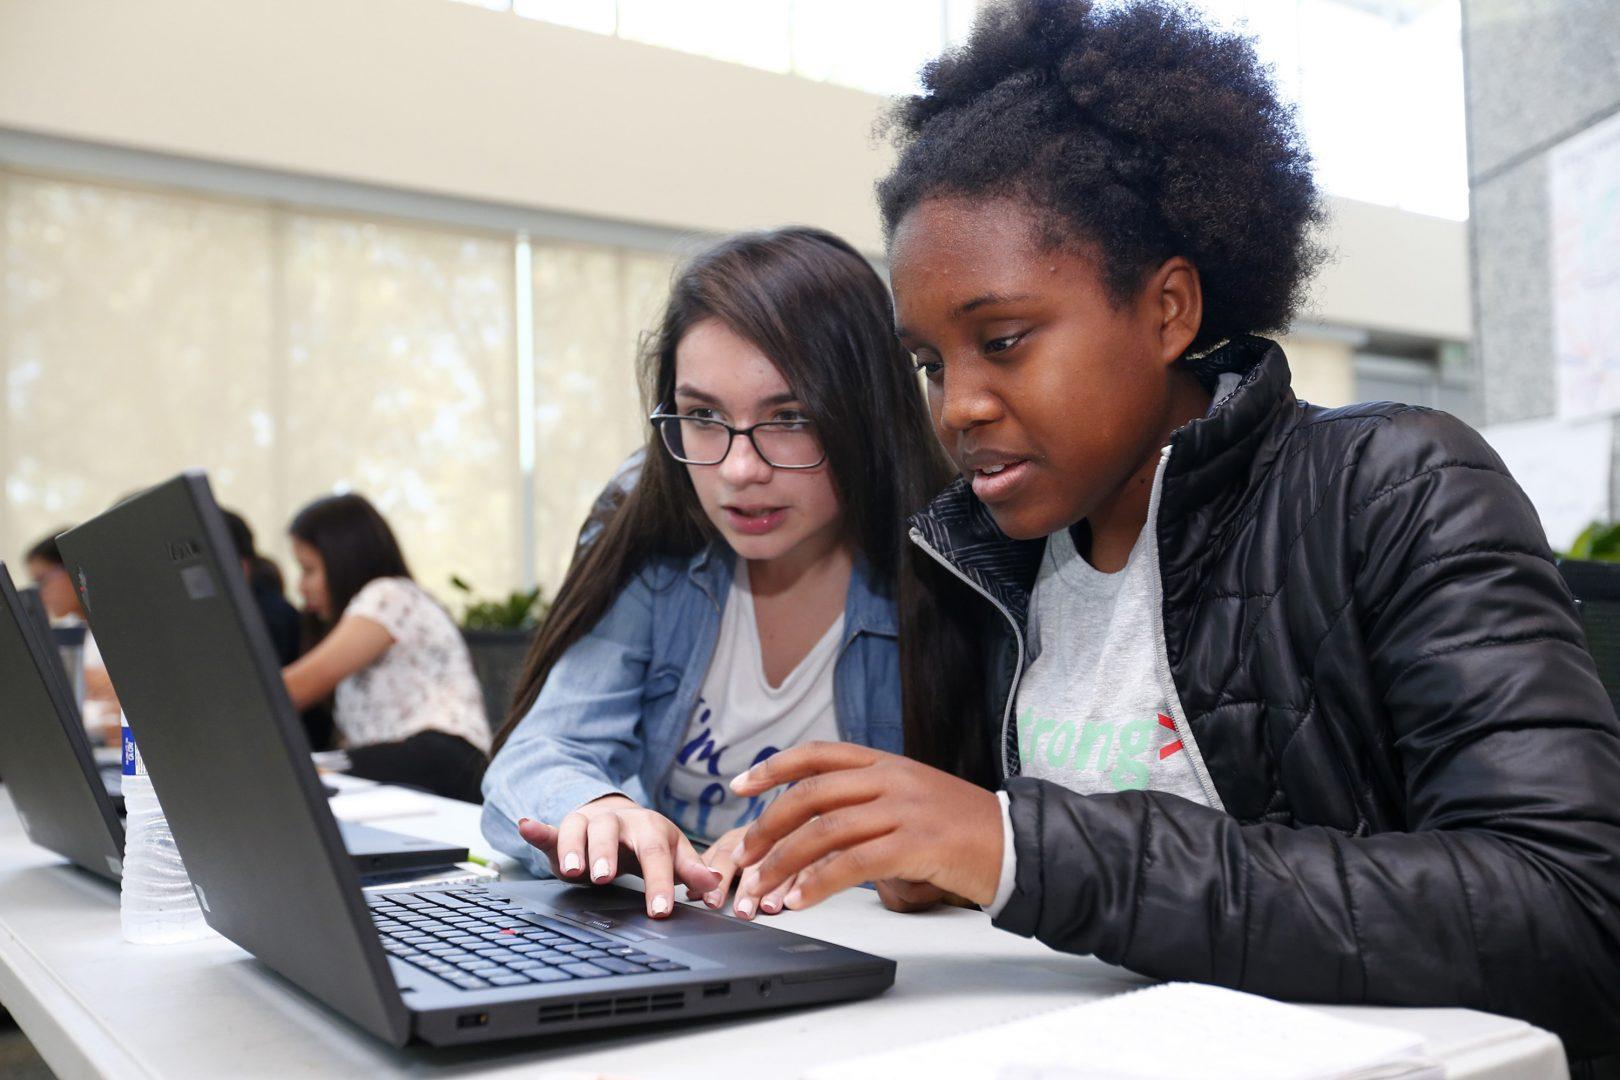 Edith Gonzalez, 16, left, and Hannah Leonard, 16, right, work together on a coding project during a summer program at Adobe Systems in San Jose, Calif., on June 28, 2016. There has been a growth in coding camps to get girls interested in learning to write code. (TNS)